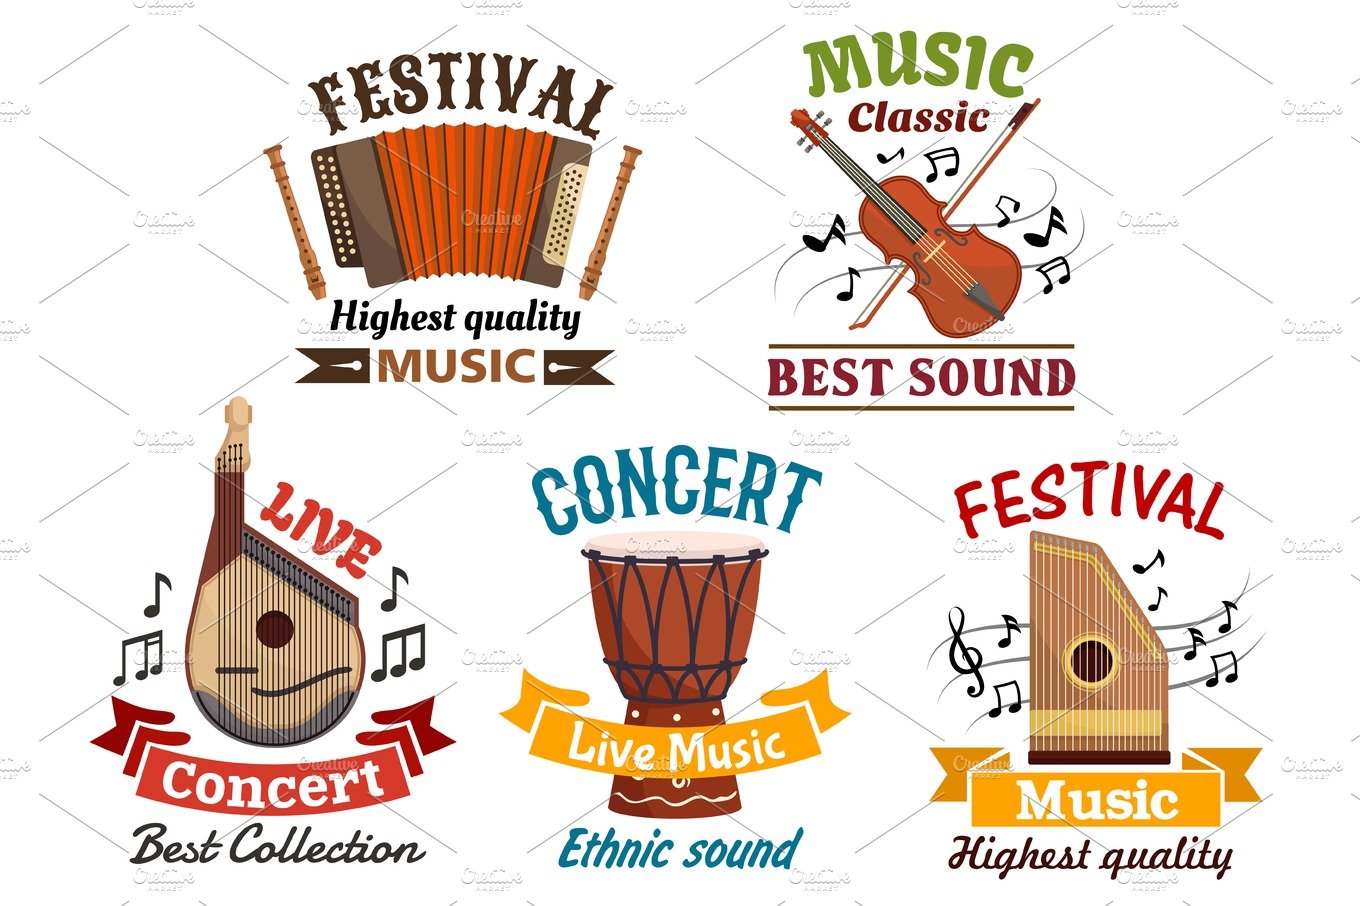 Musical instrumetns icons for festival, concert cover image.